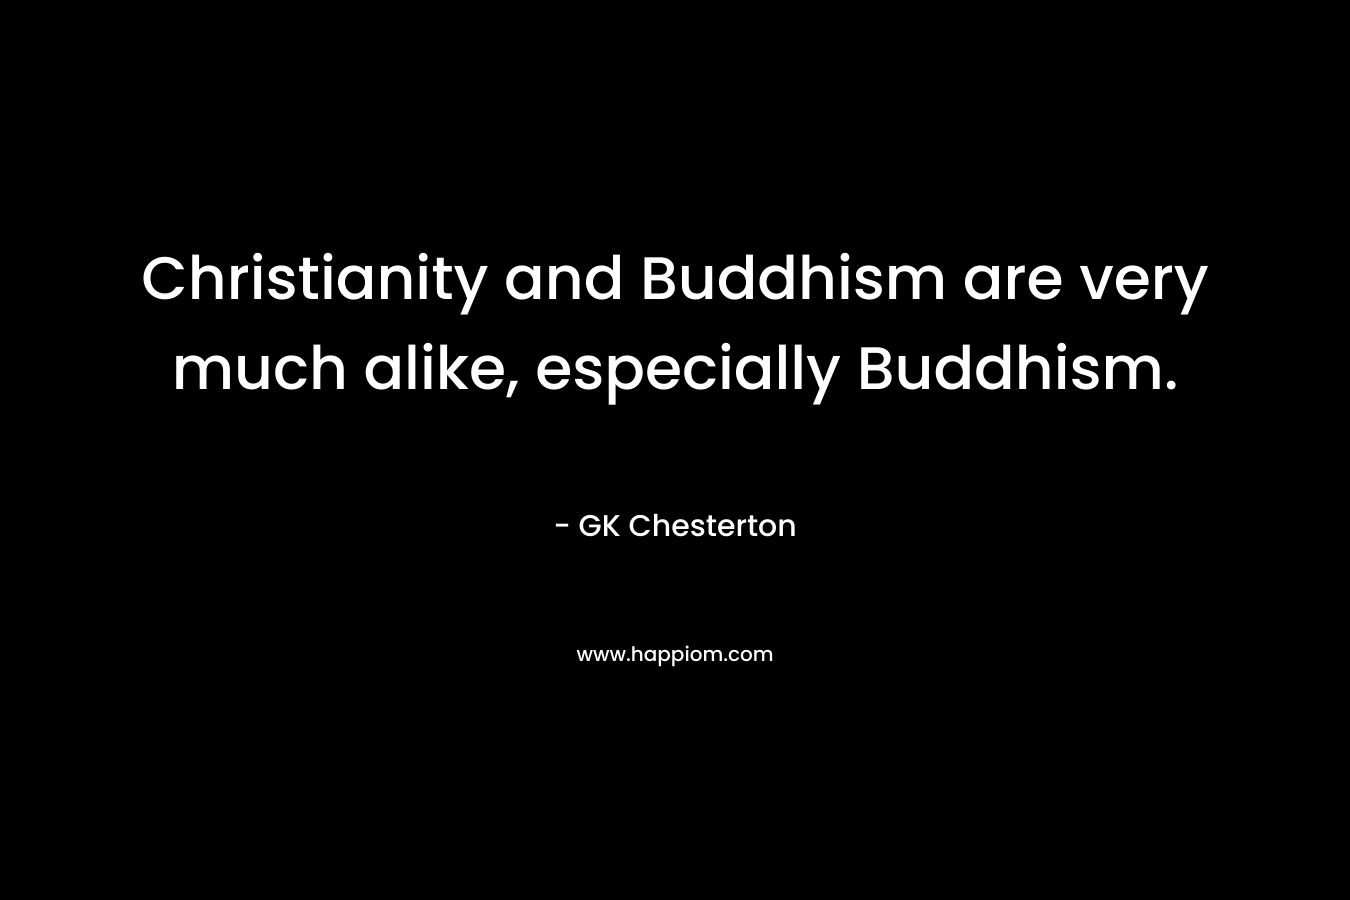 Christianity and Buddhism are very much alike, especially Buddhism.